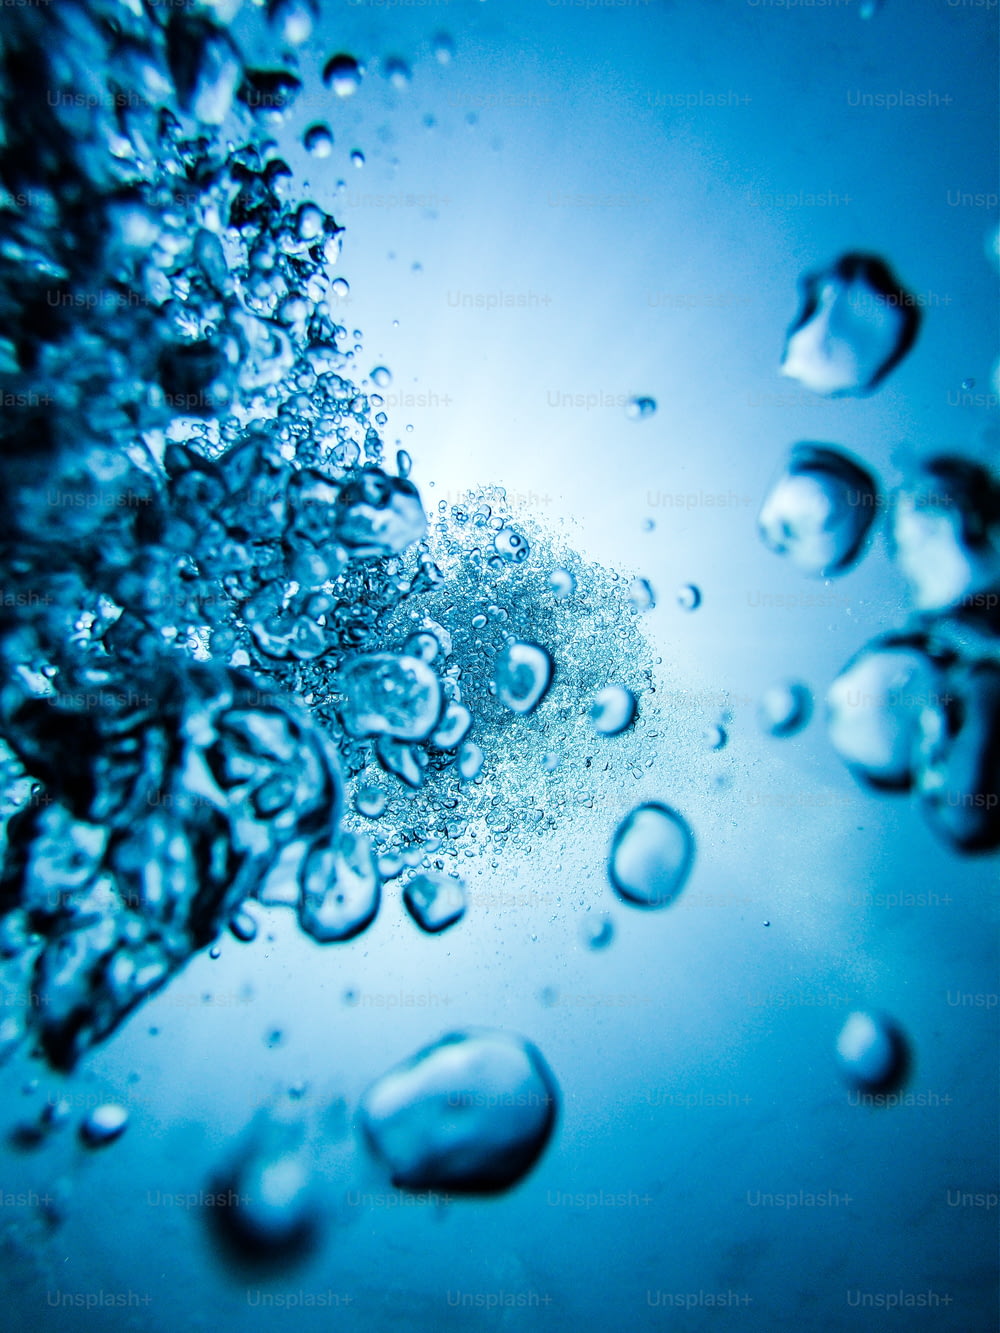 a close up of water bubbles on a blue surface